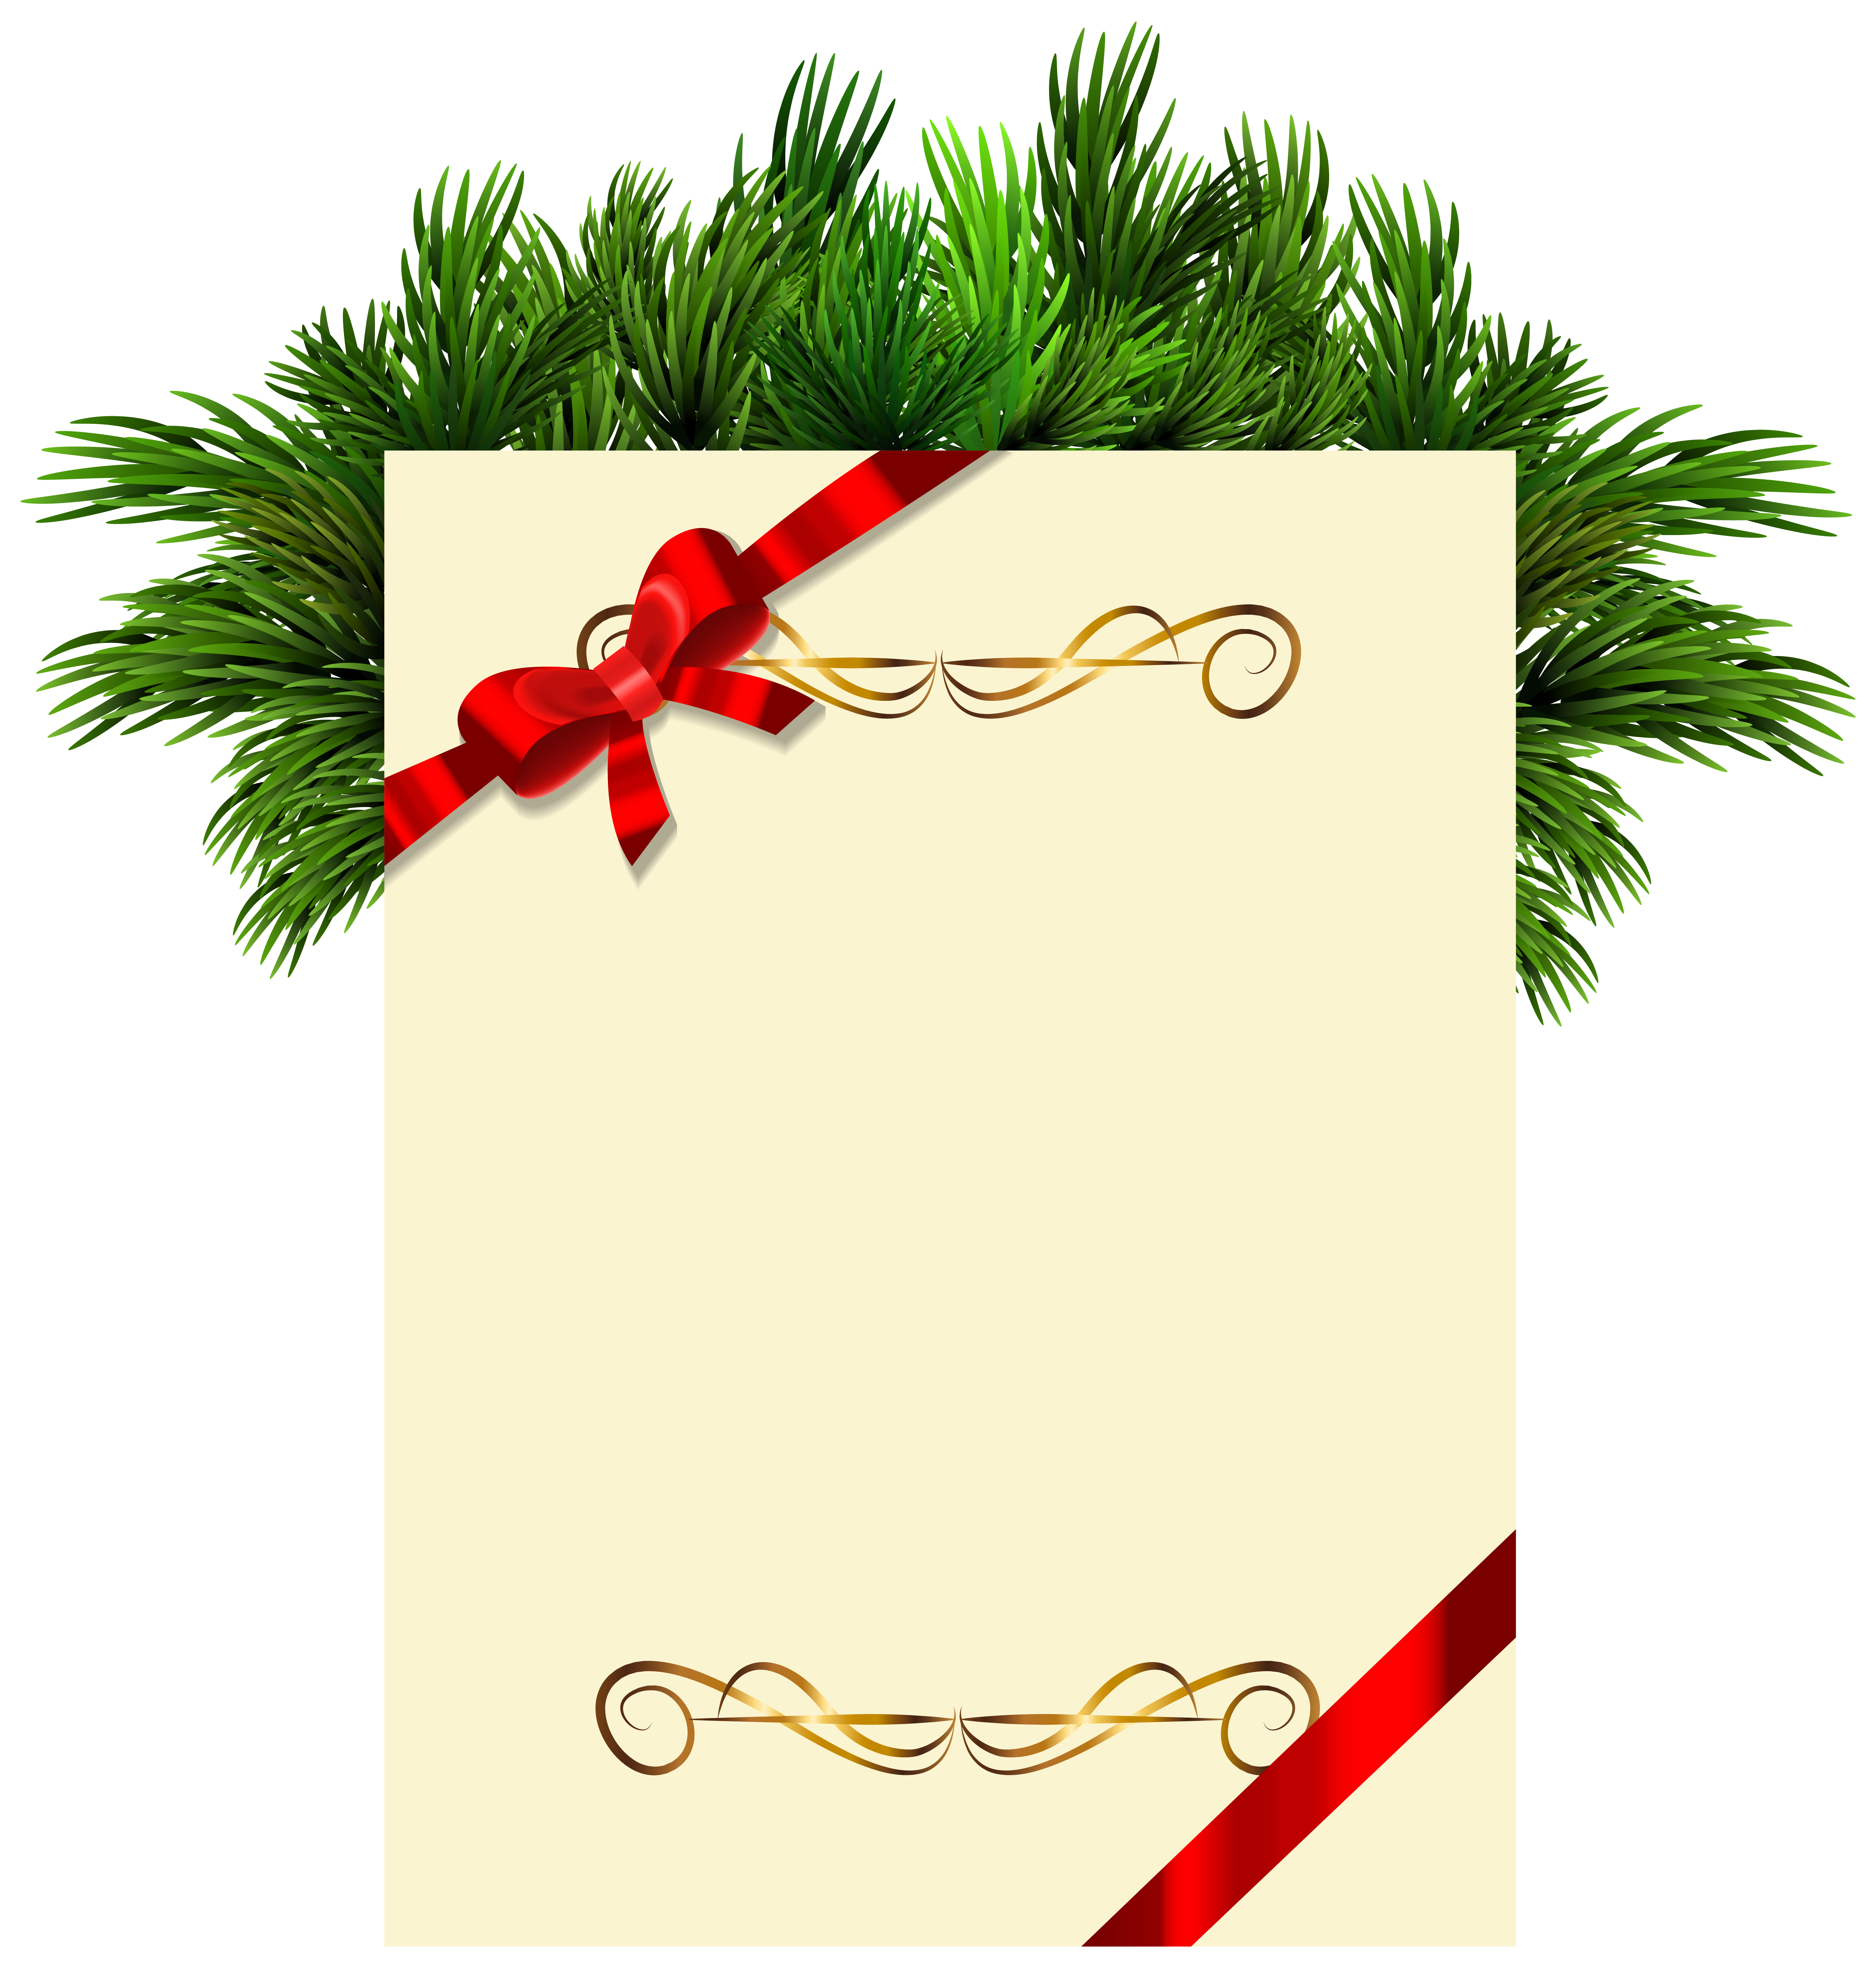 Download Picture Branches Claus Pine Invitation Santa Blank HQ PNG Image |  FreePNGImg